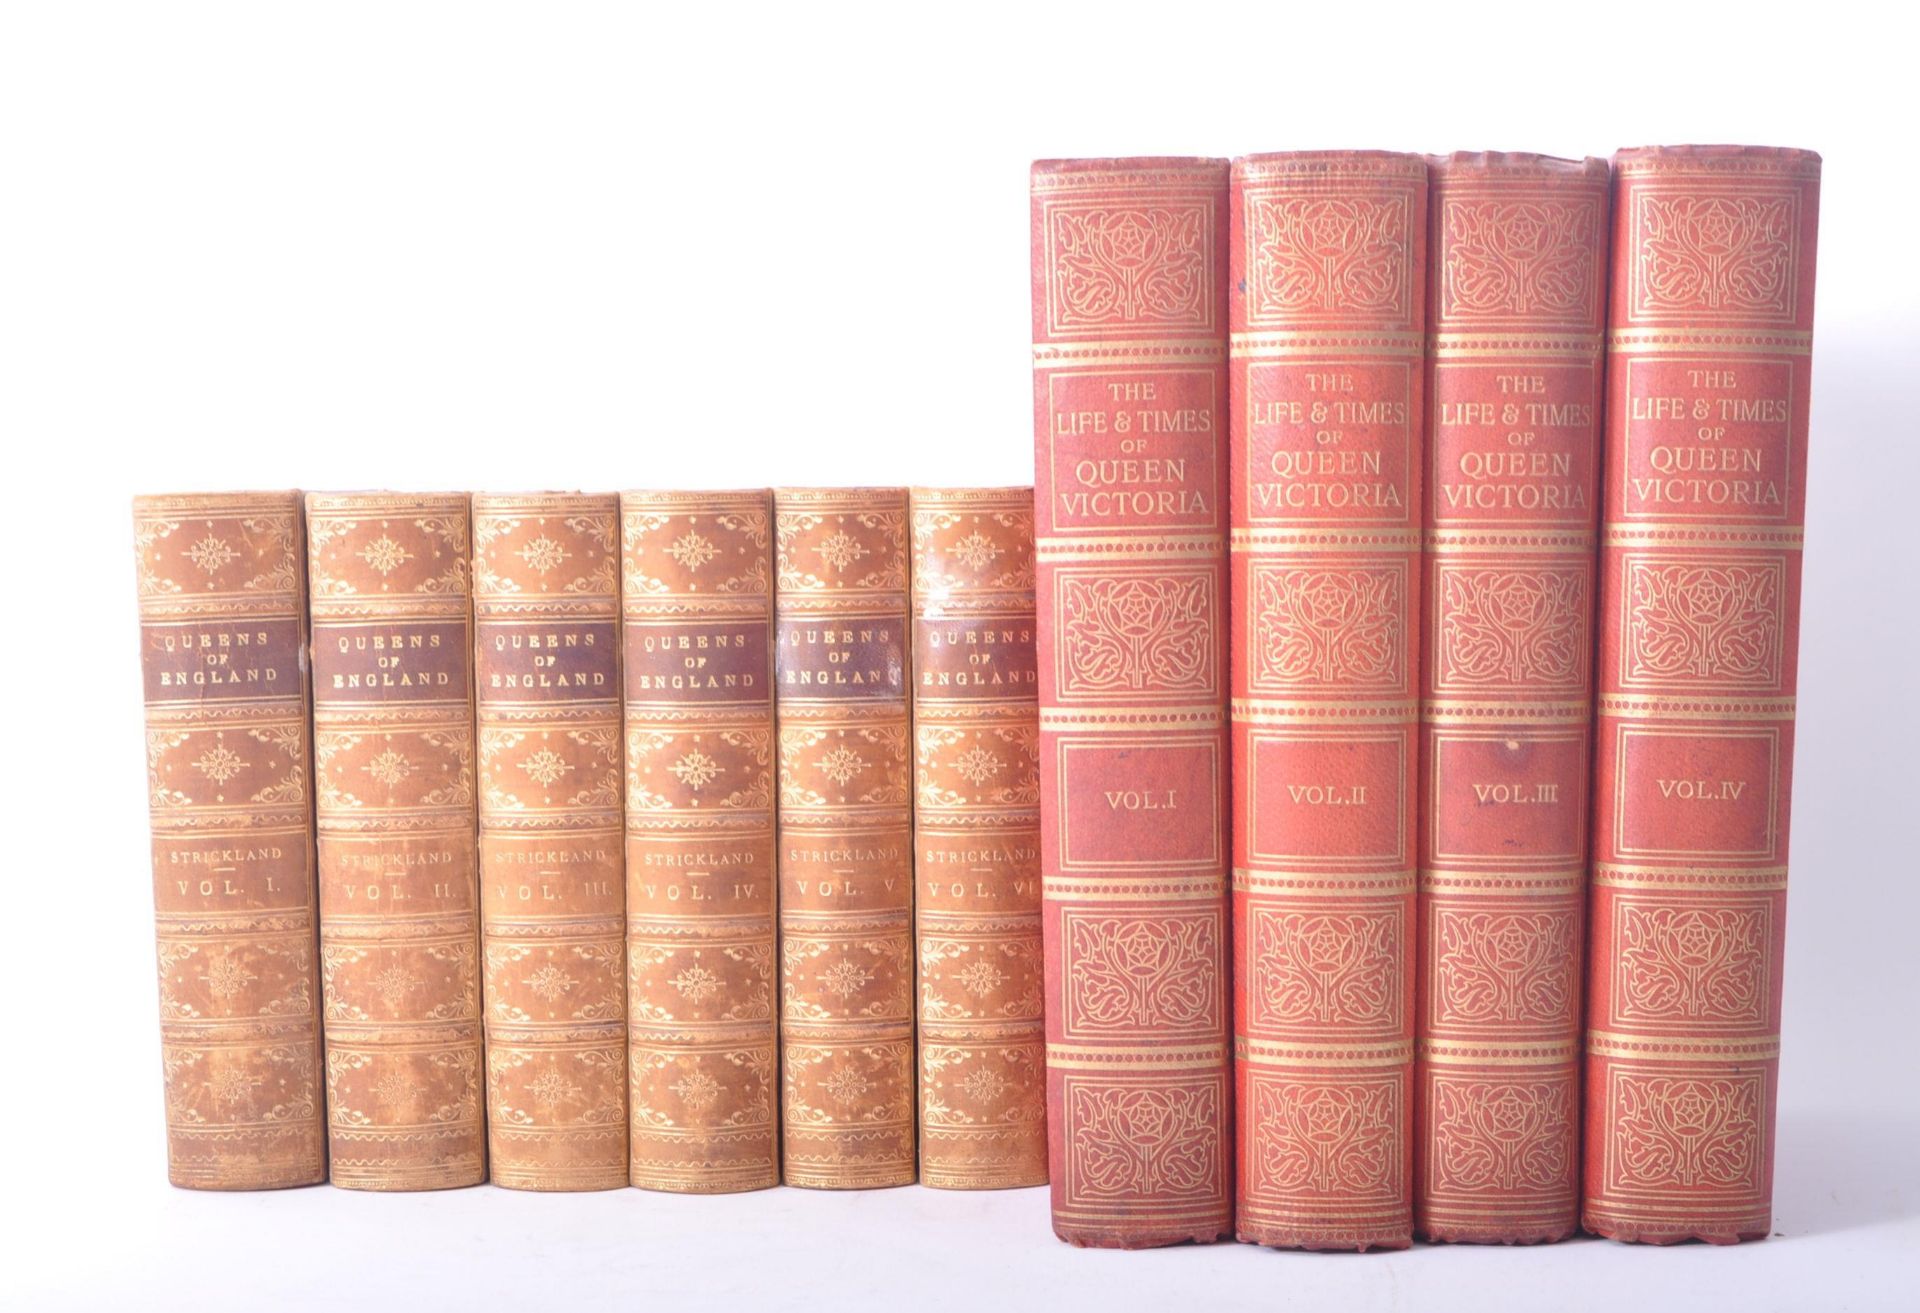 ROYAL INTEREST - TWO LATE VICTORIAN BOOK SETS ON BRITISH QUEENS